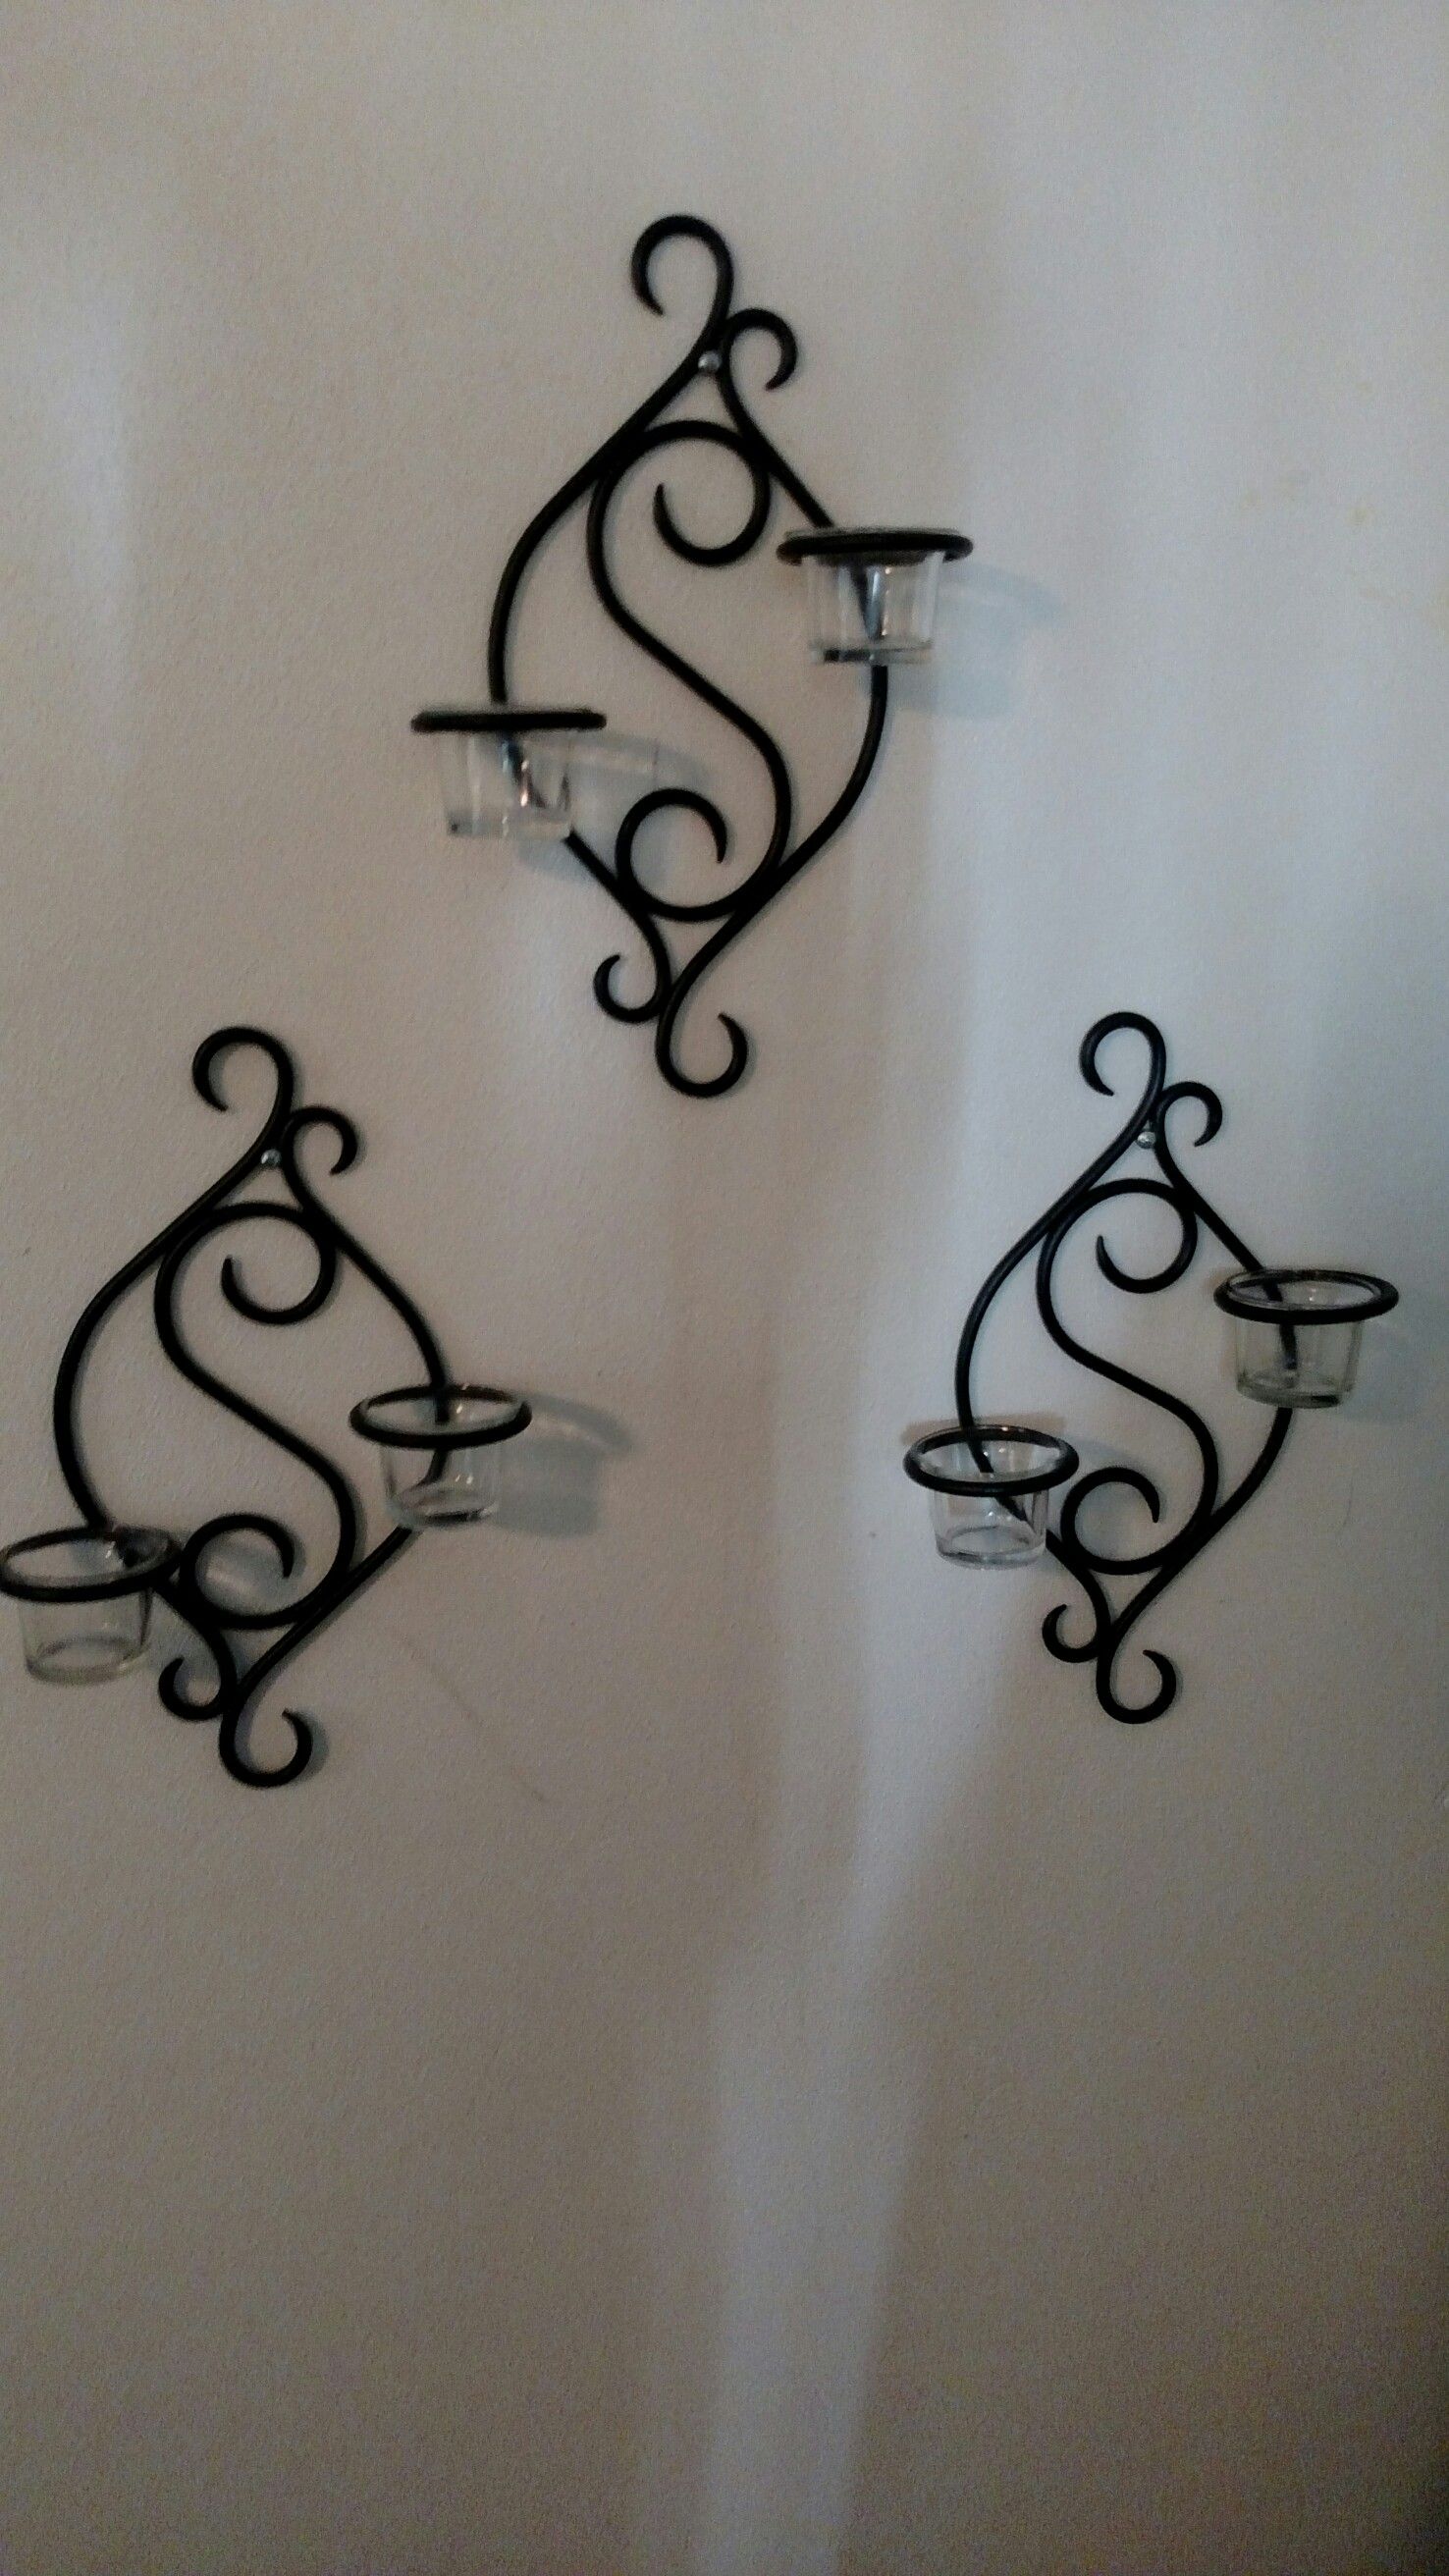 Set of 3 PartyLite Scroll Sconce